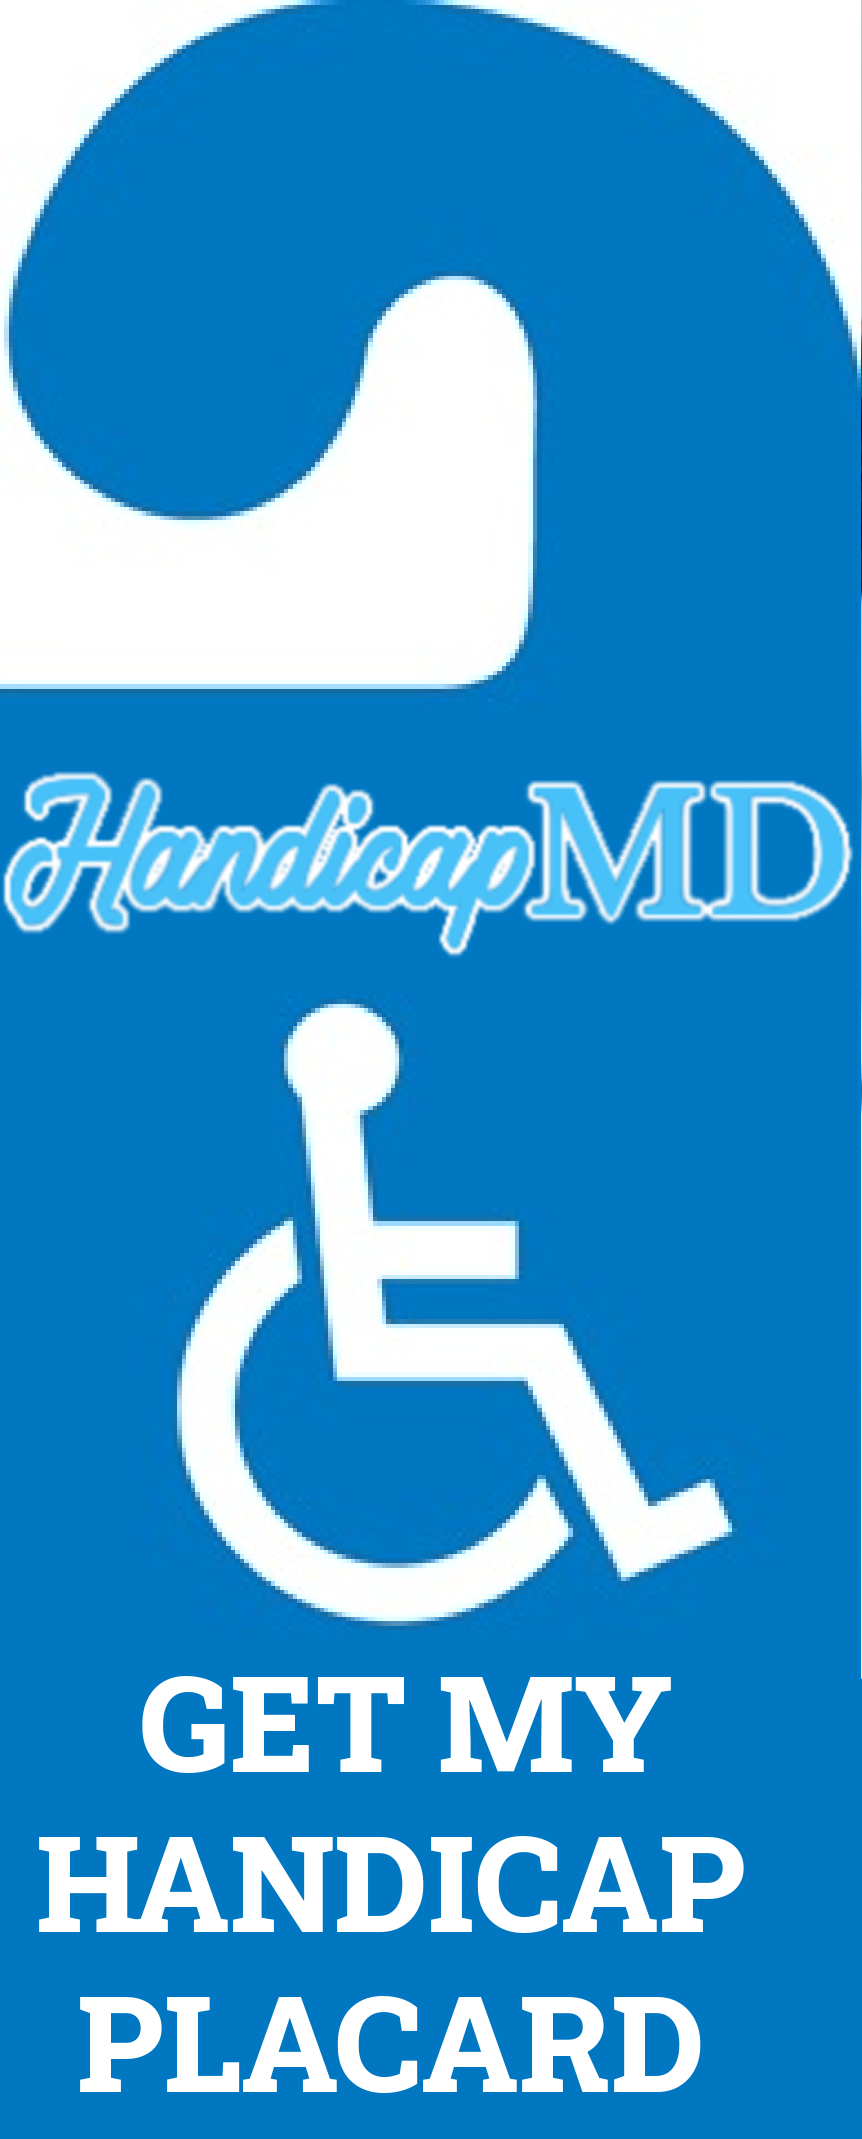 How to Replace a Lost or Stolen Handicap Placard in Alaska